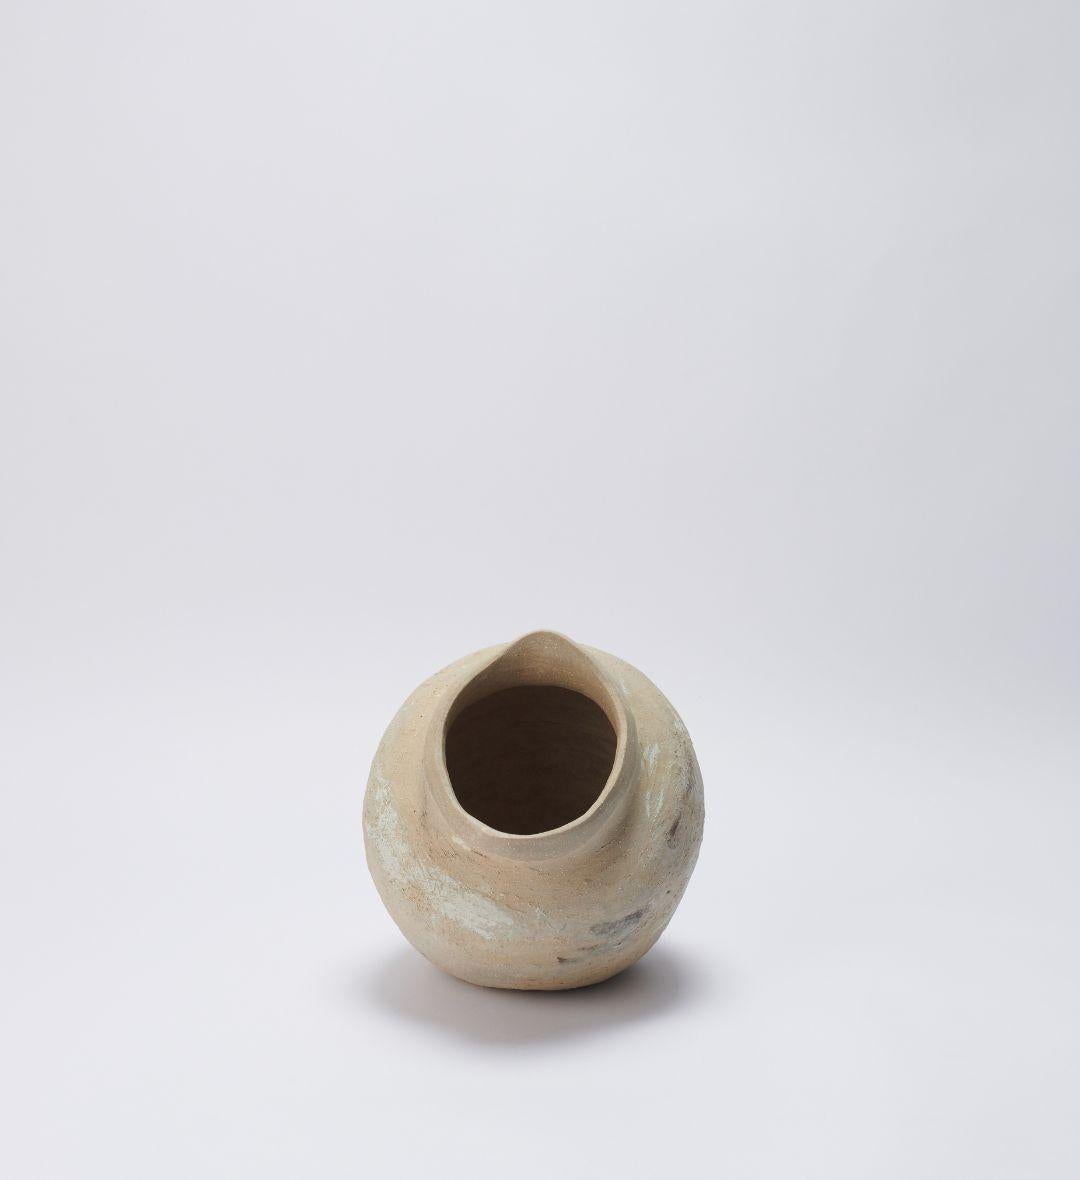 Other Poured Vessel 05 by Joana Kieppe For Sale